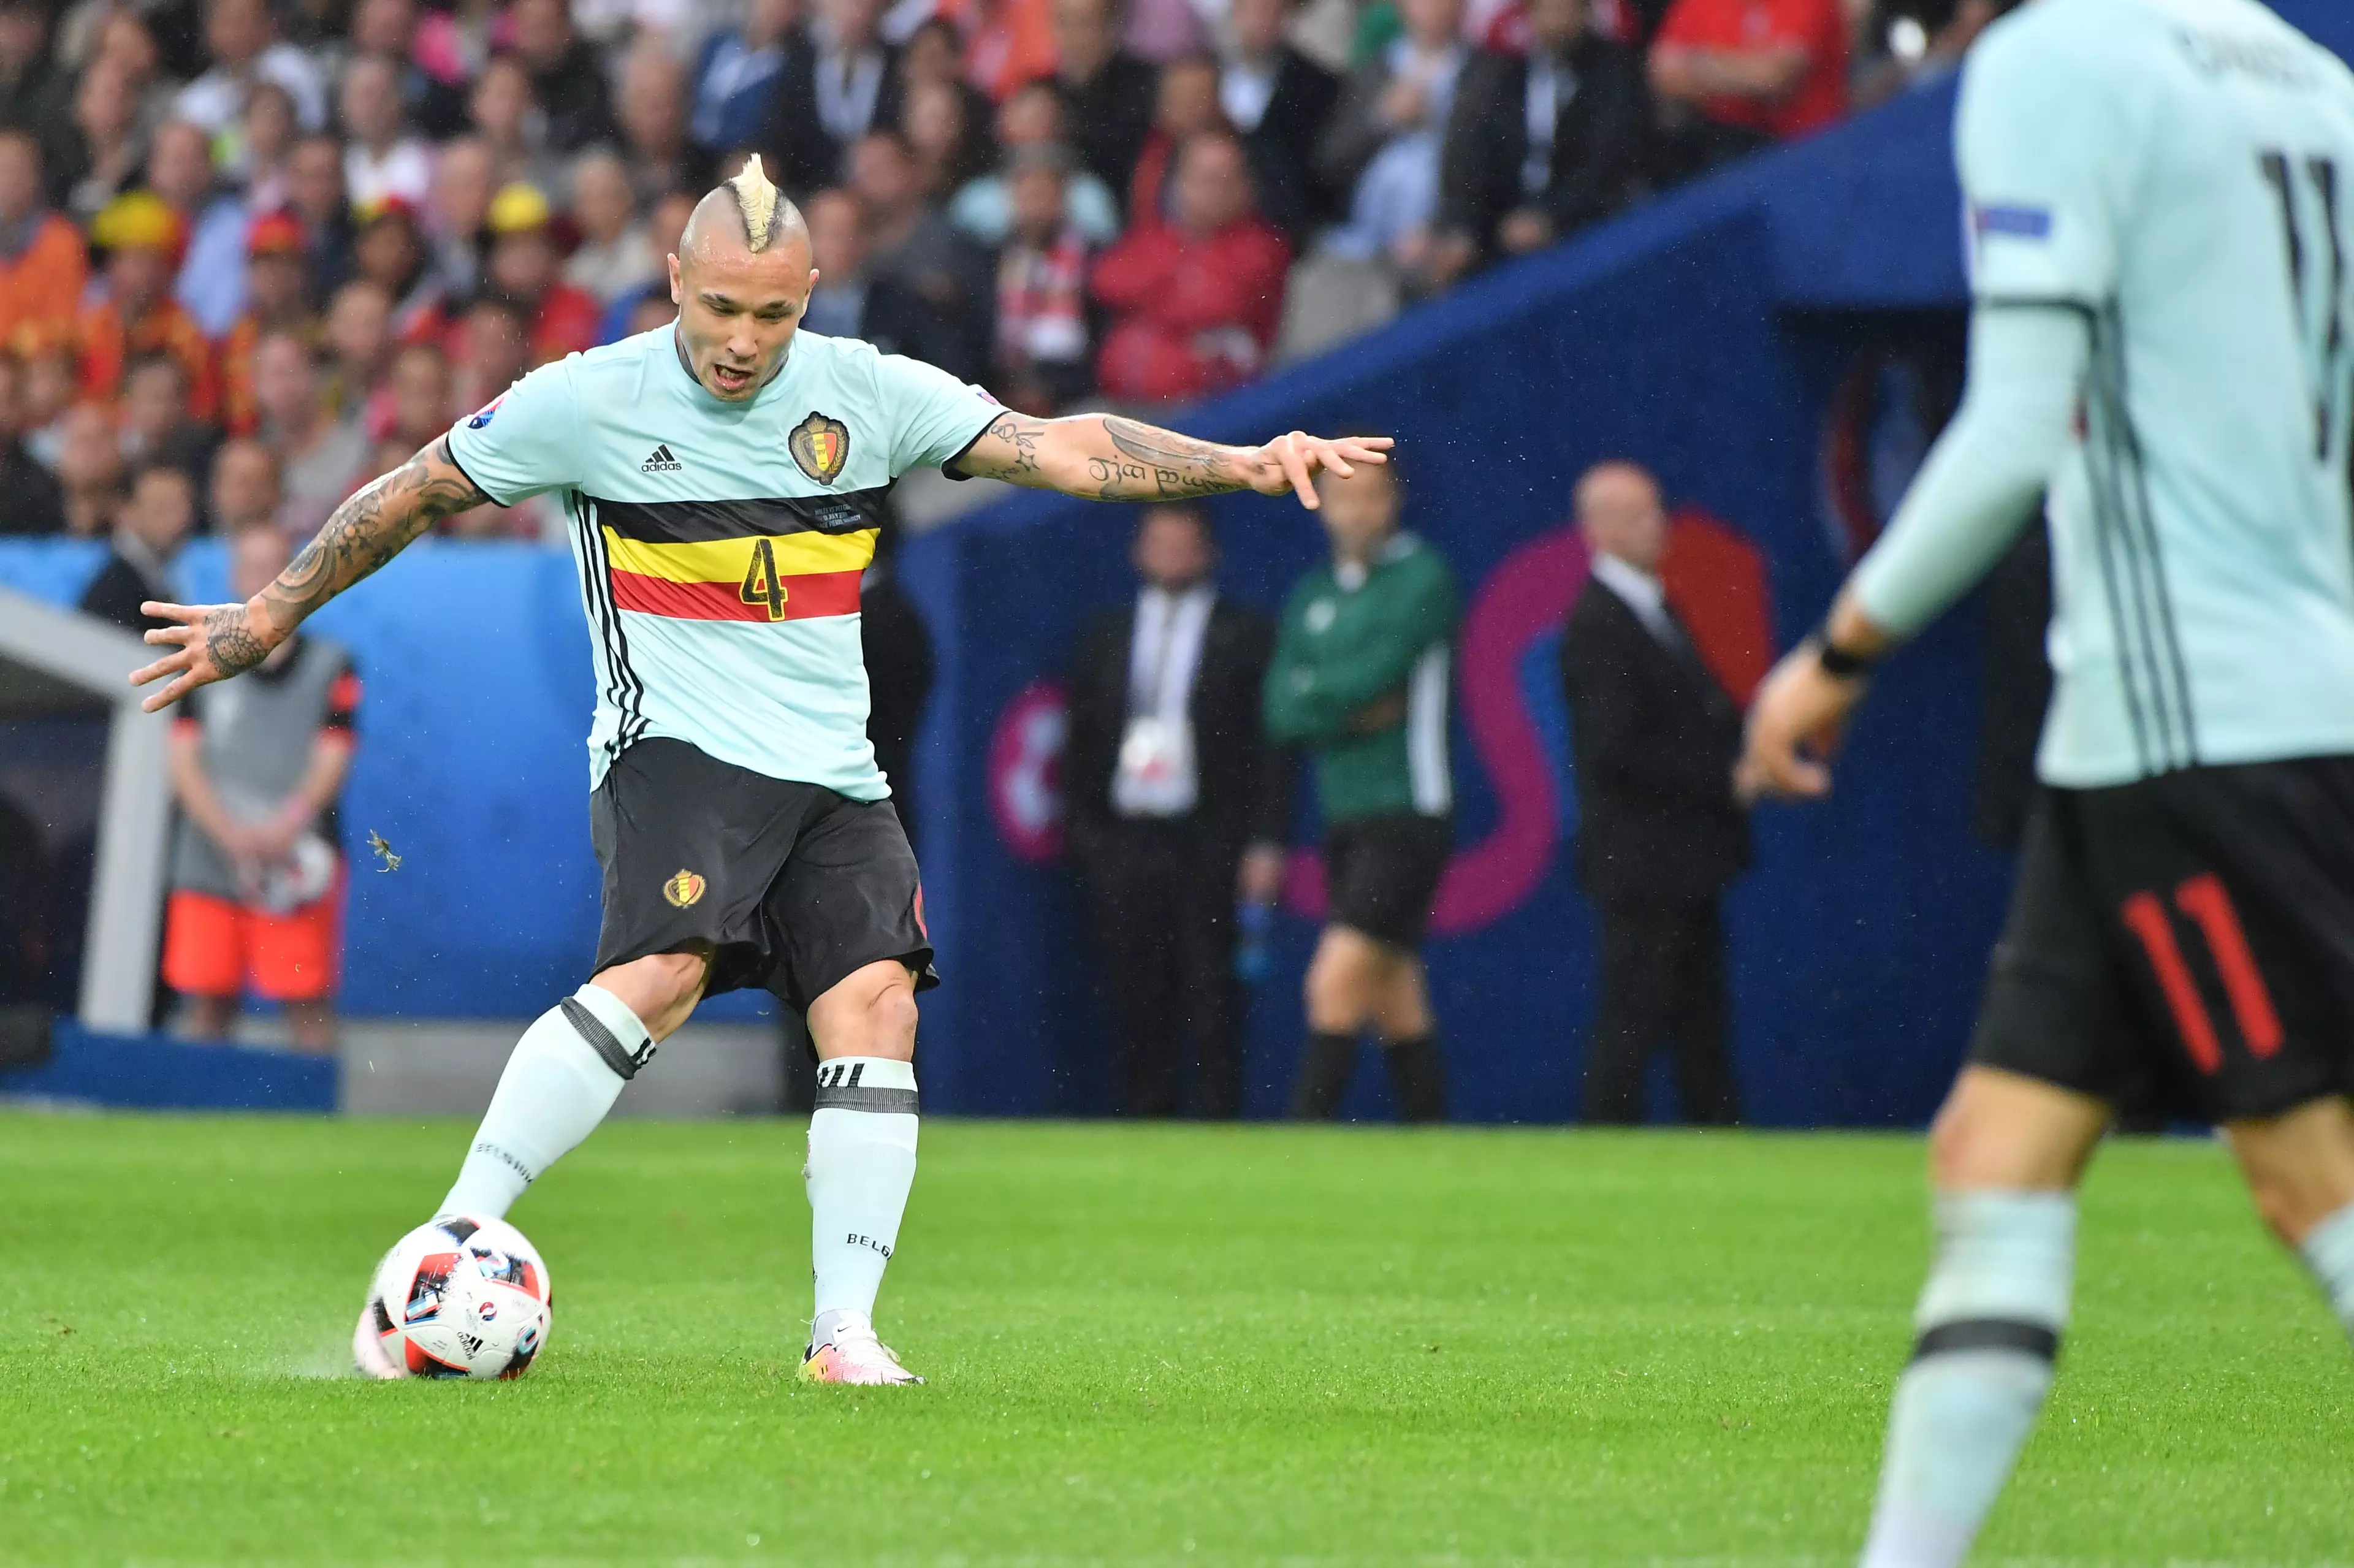 Despite his qualities and his popularity, Nainggolan has been dropped from the Belgium squad by manager Roberto Martinez. Images: PA